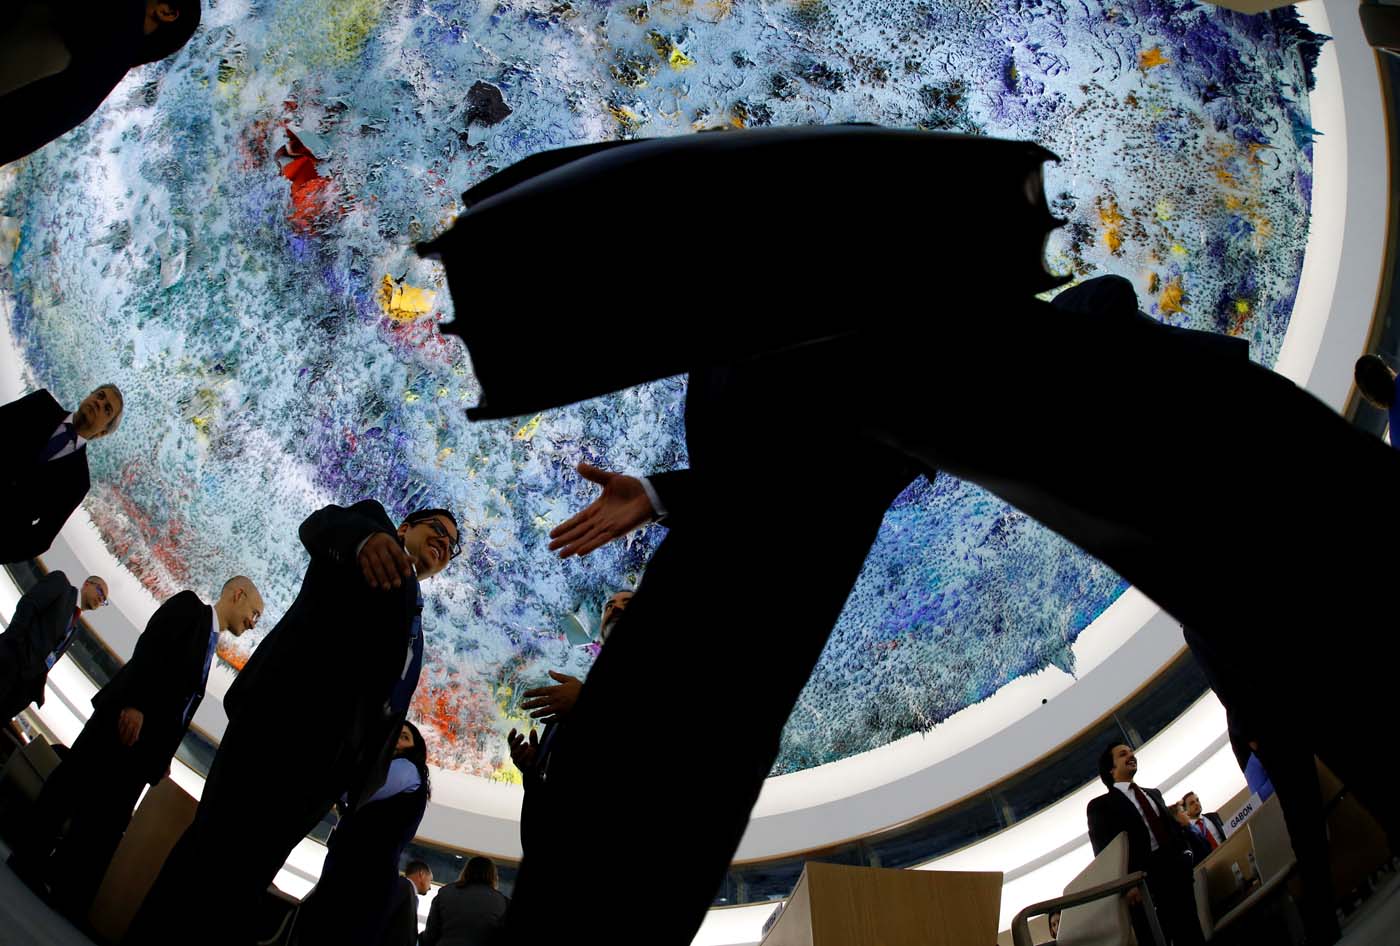 Delegates arrive for the 36th Session of the Human Rights Council at the United Nations in Geneva, Switzerland September 11, 2017. Picture taken with a fisheye lens.  REUTERS/Denis Balibouse